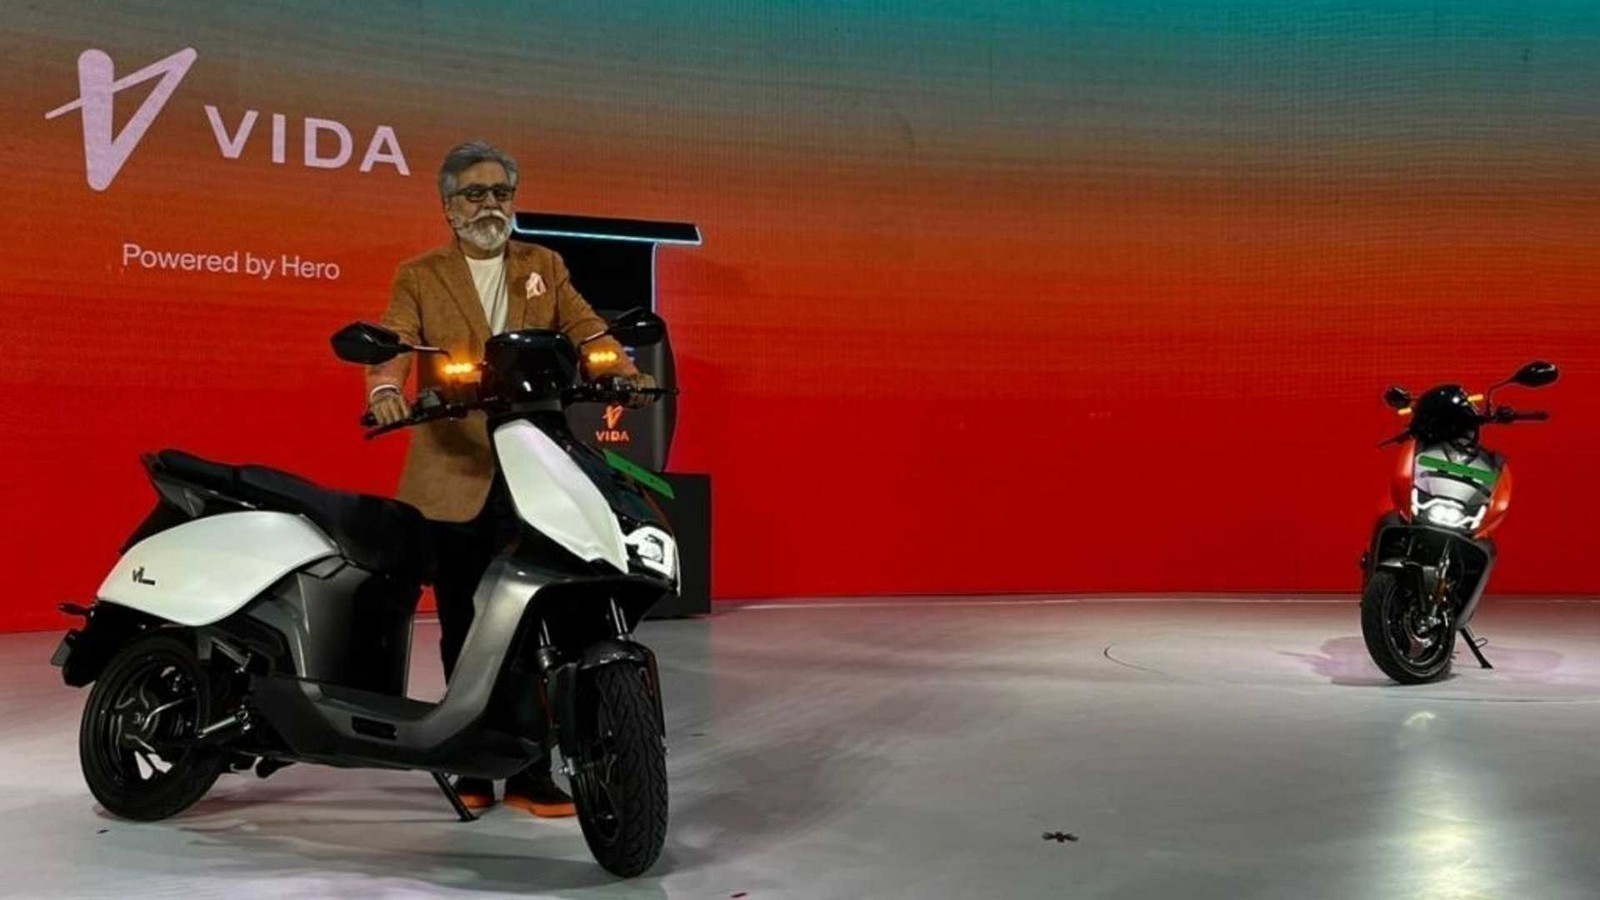 hero-motocorp-officially-launches-the-vida-v1-electric-scooter.jpg